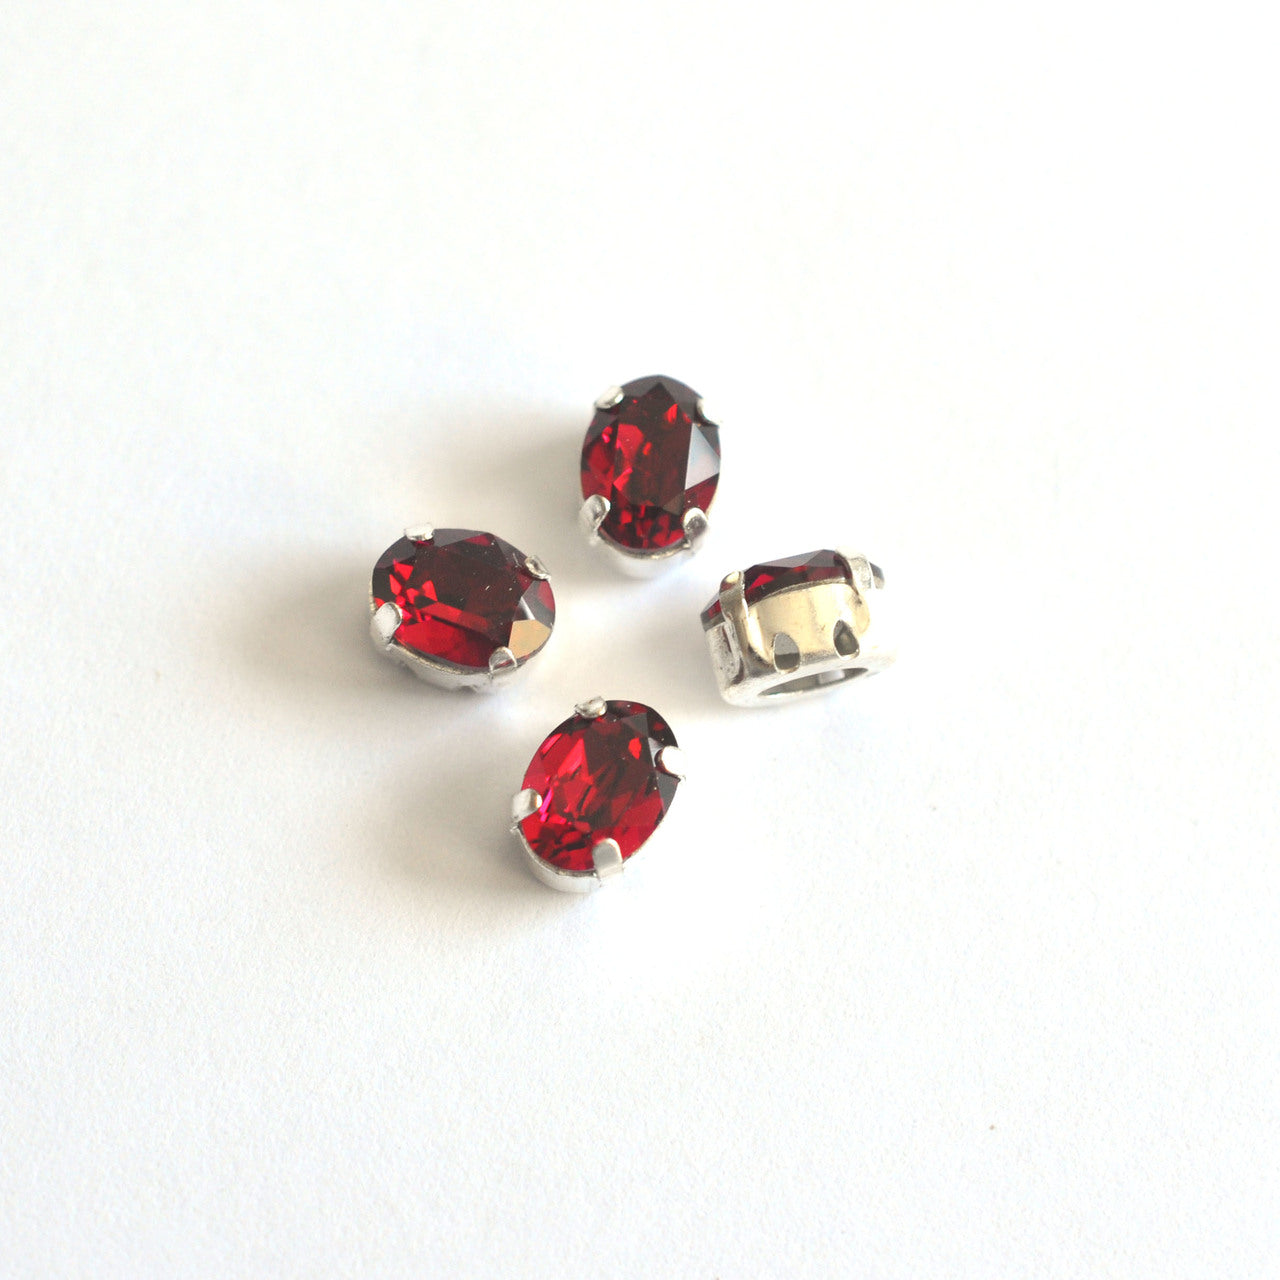 Ruby 8x6mm Sew On Set Ovals - 4 Pieces